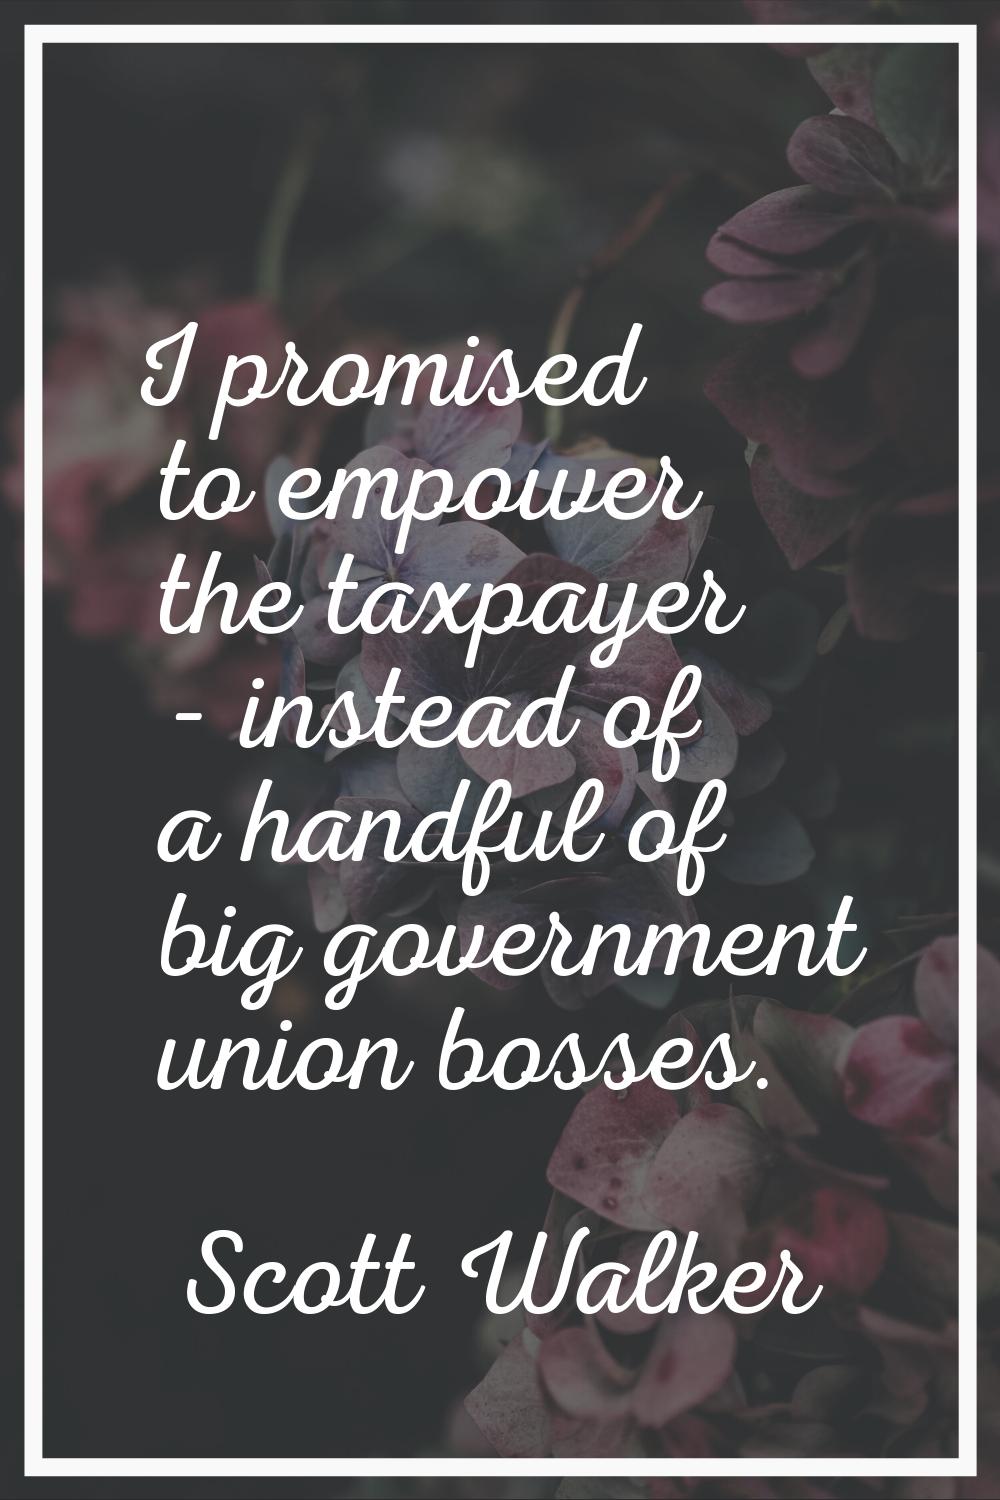 I promised to empower the taxpayer - instead of a handful of big government union bosses.